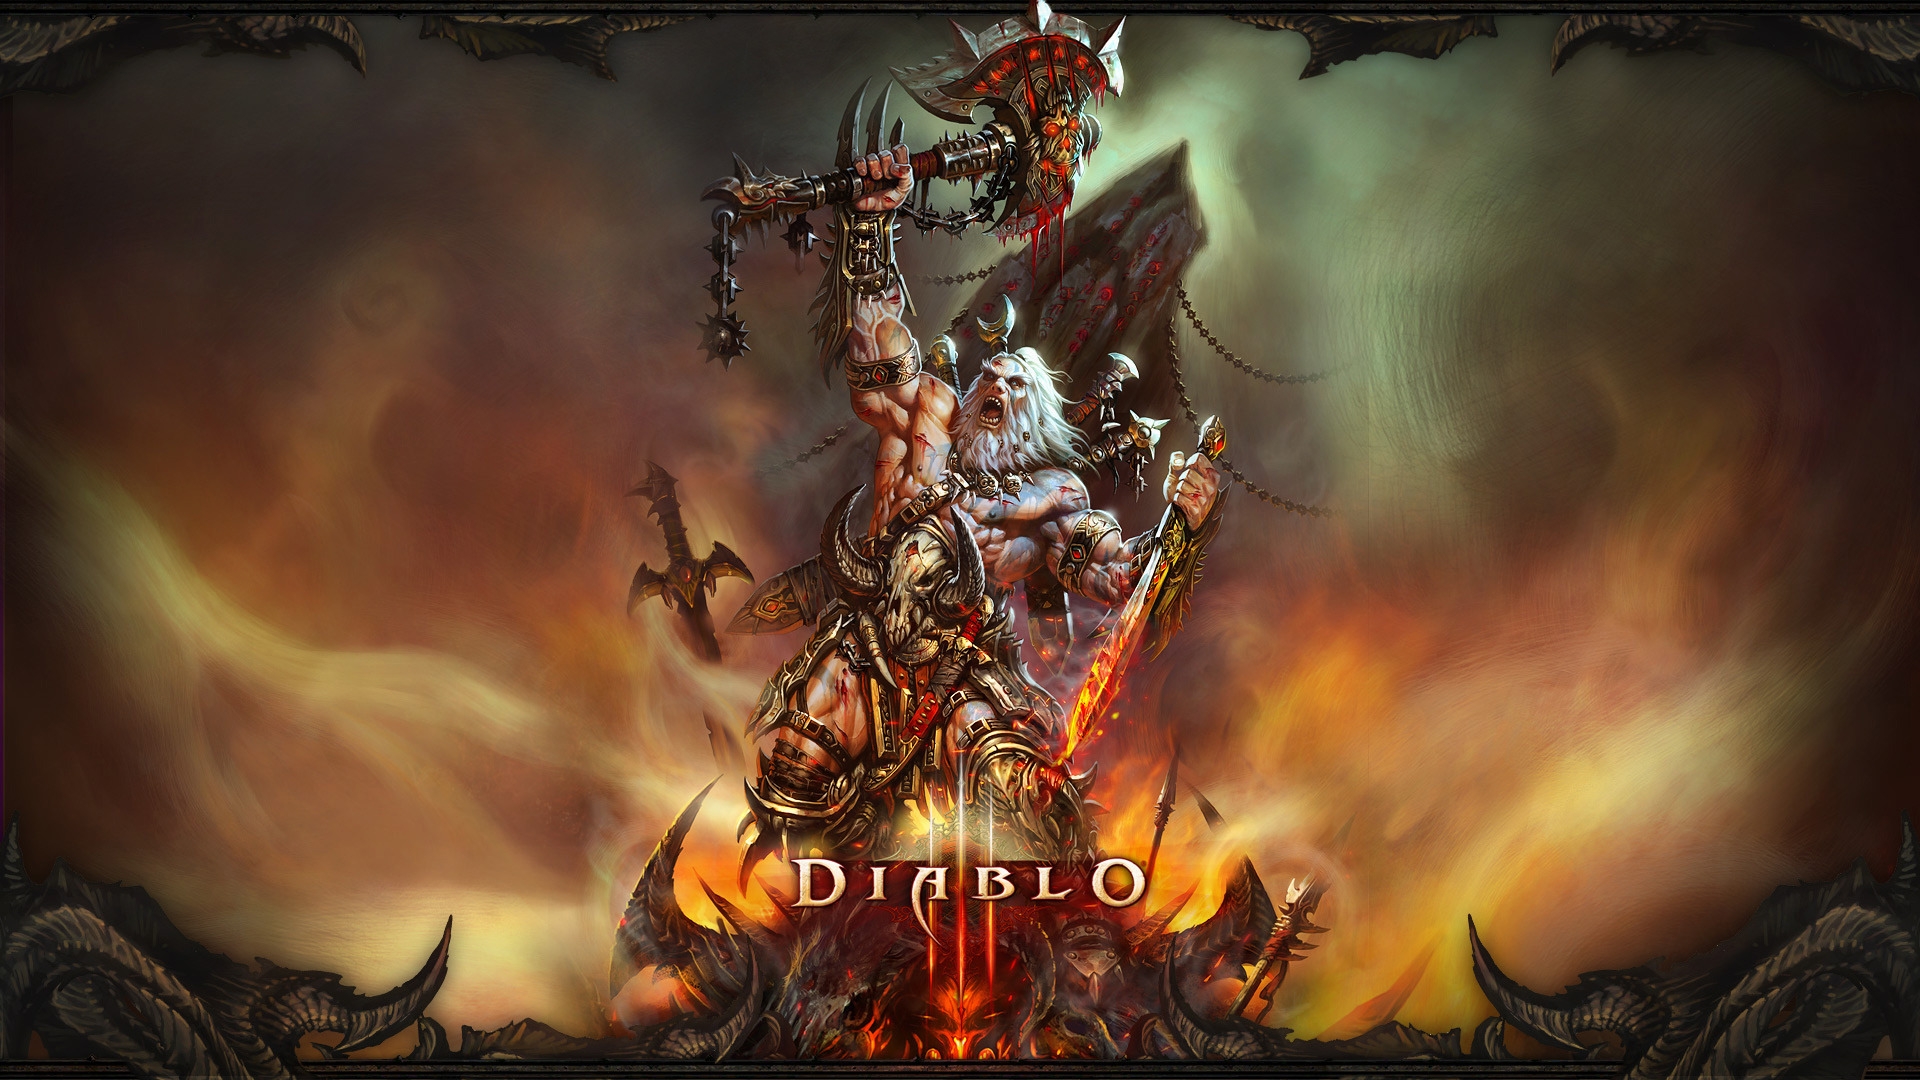 Barbarian Victory Diablo 3 for 1920 x 1080 HDTV 1080p resolution